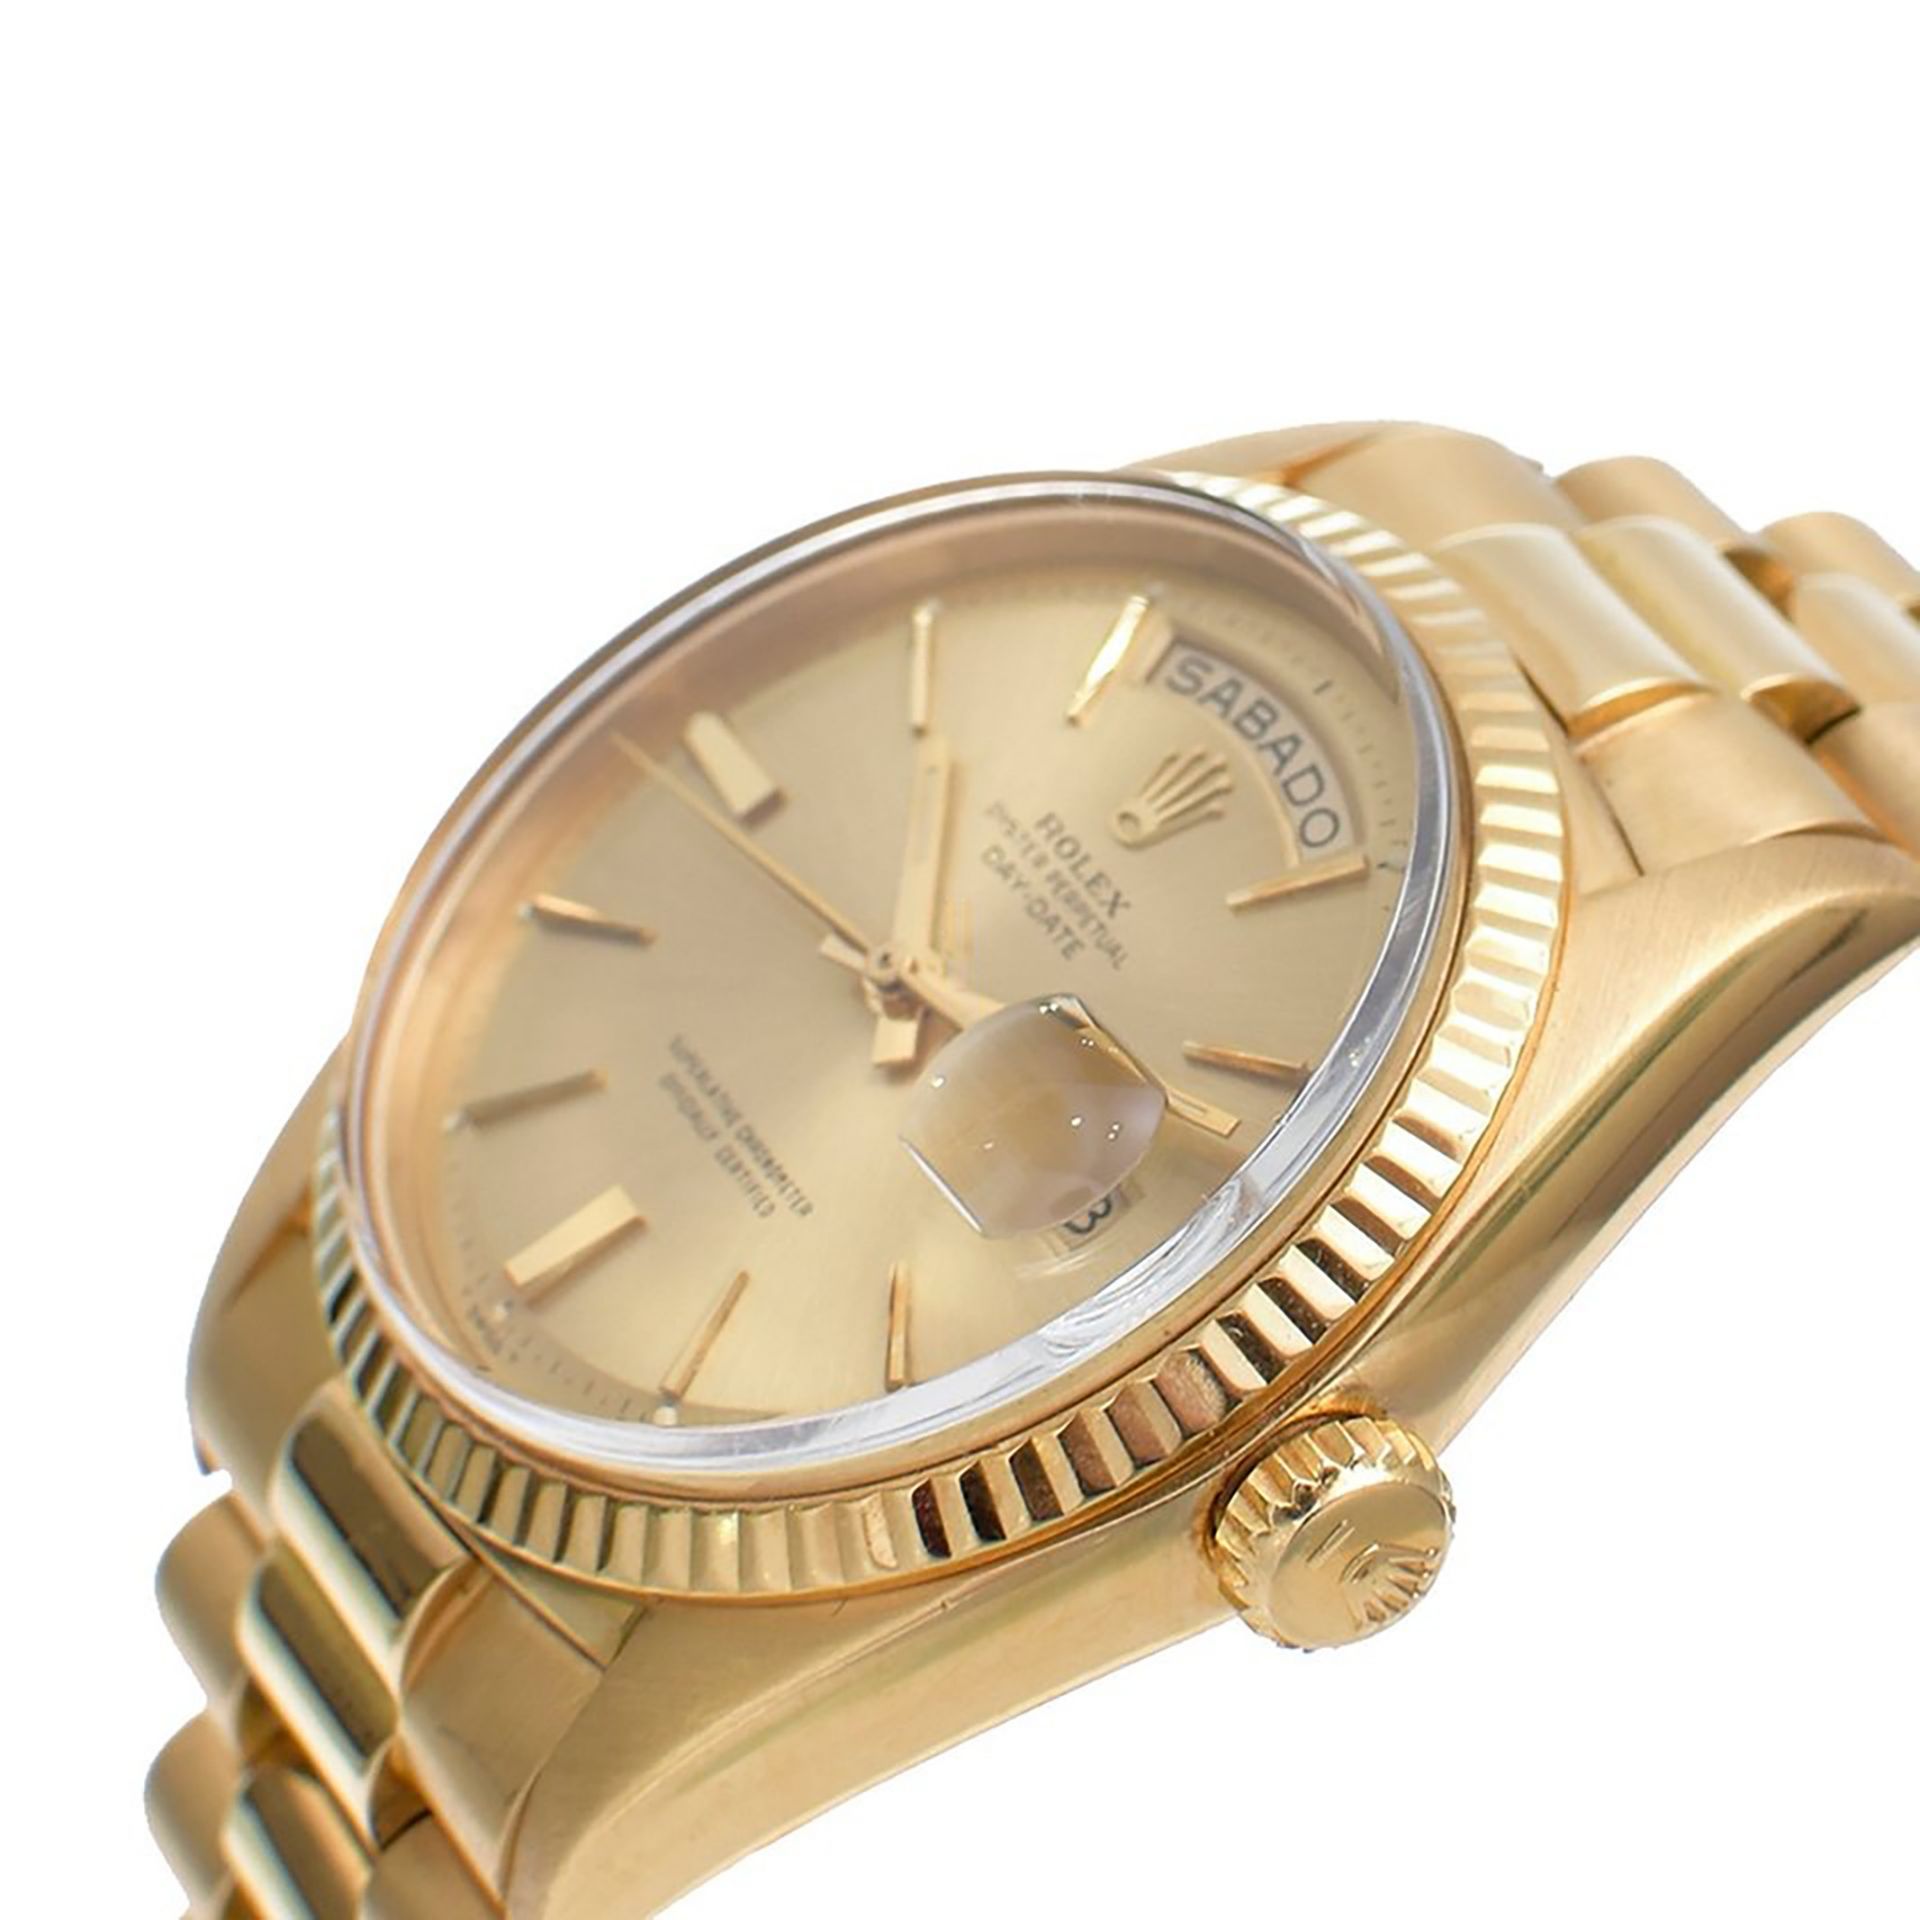 Important Rolex Day-Date wristwatch from 1968 Model "Kennedy" in 18k solid gold - Image 2 of 4